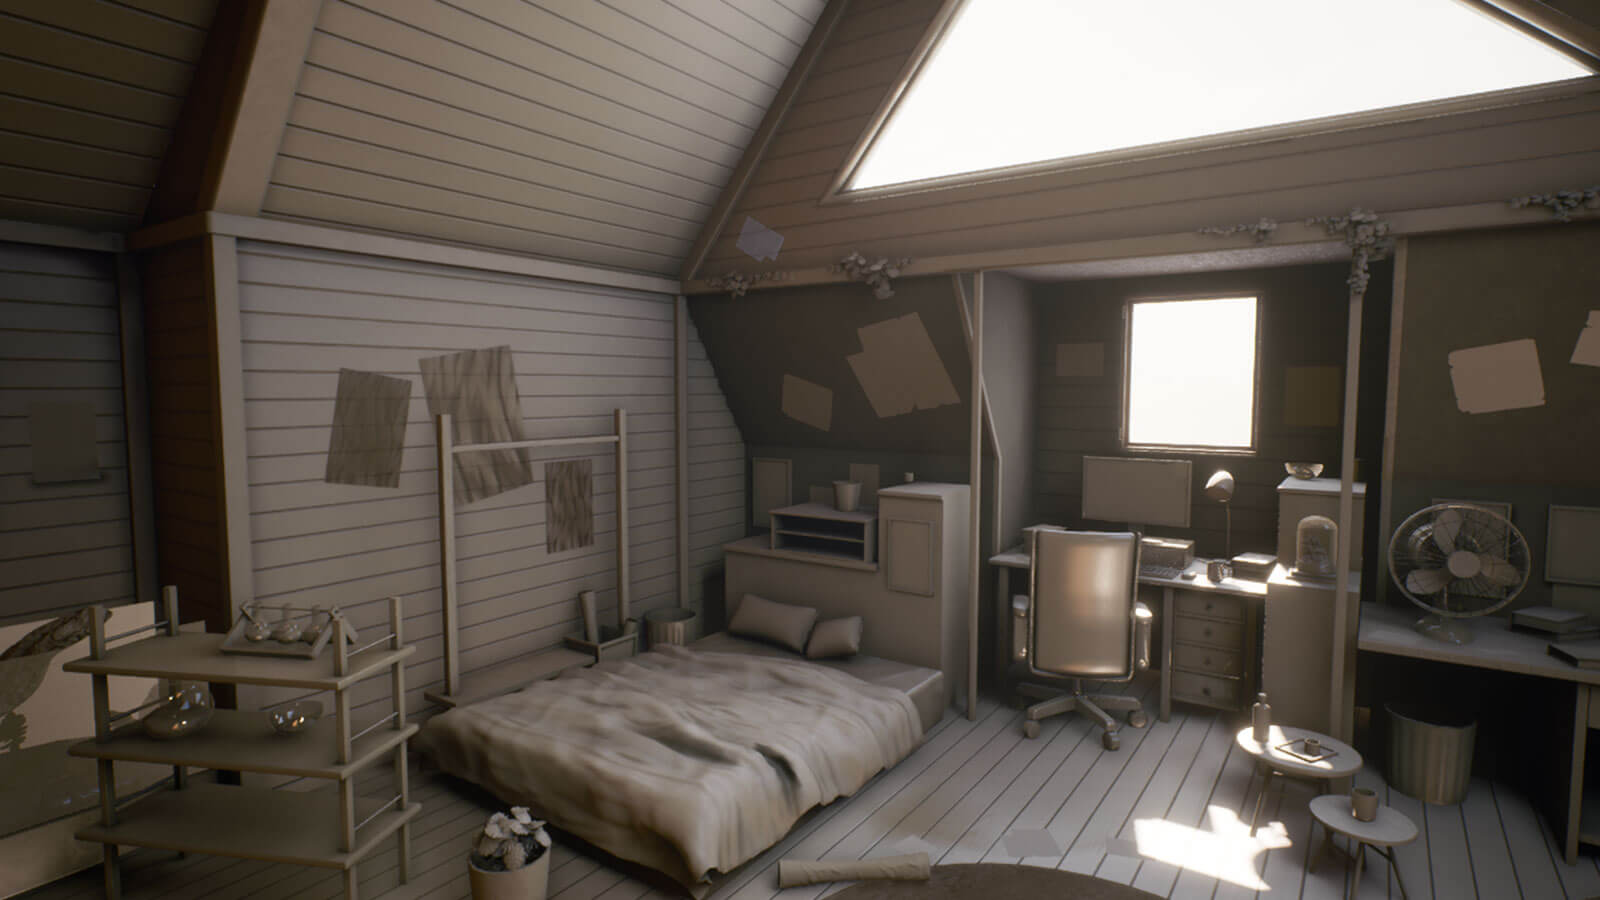 Alternative view of the room with simple lighting and greyscale 3D objects